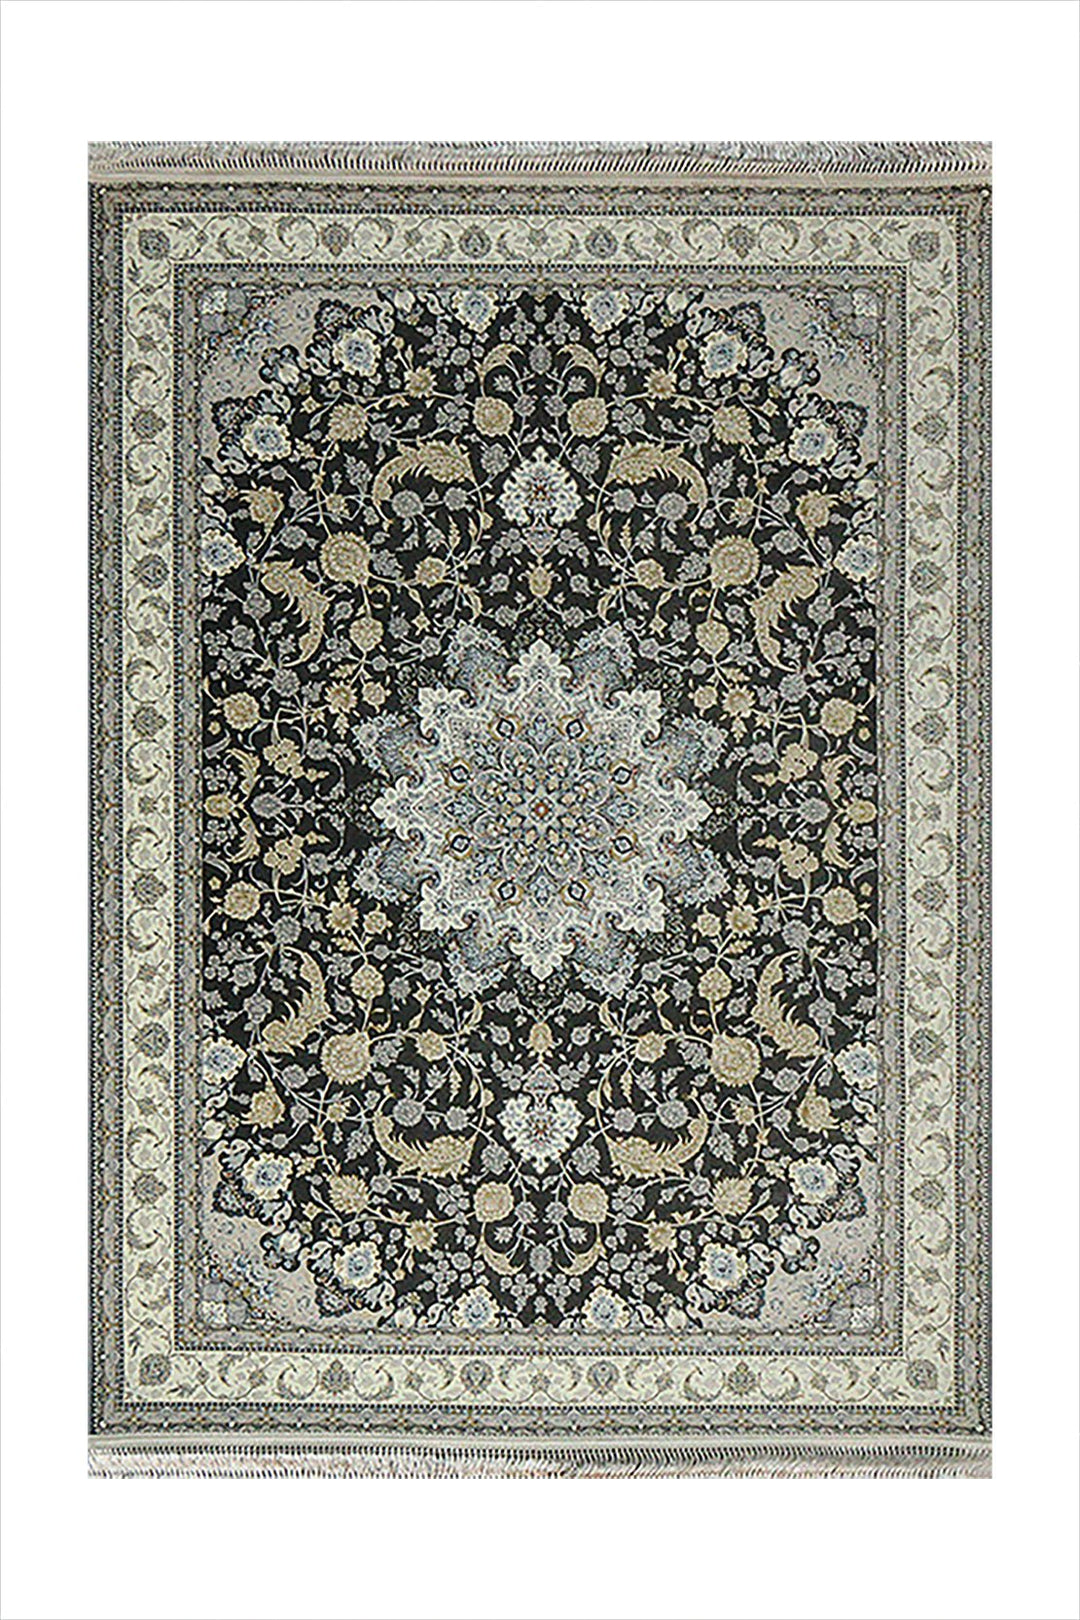 Iranian Premium Quality Authentic 1500 Rug - 3.9 x 5.5 FT - Gray - Resilient Construction for Long-Lasting Use - V Surfaces